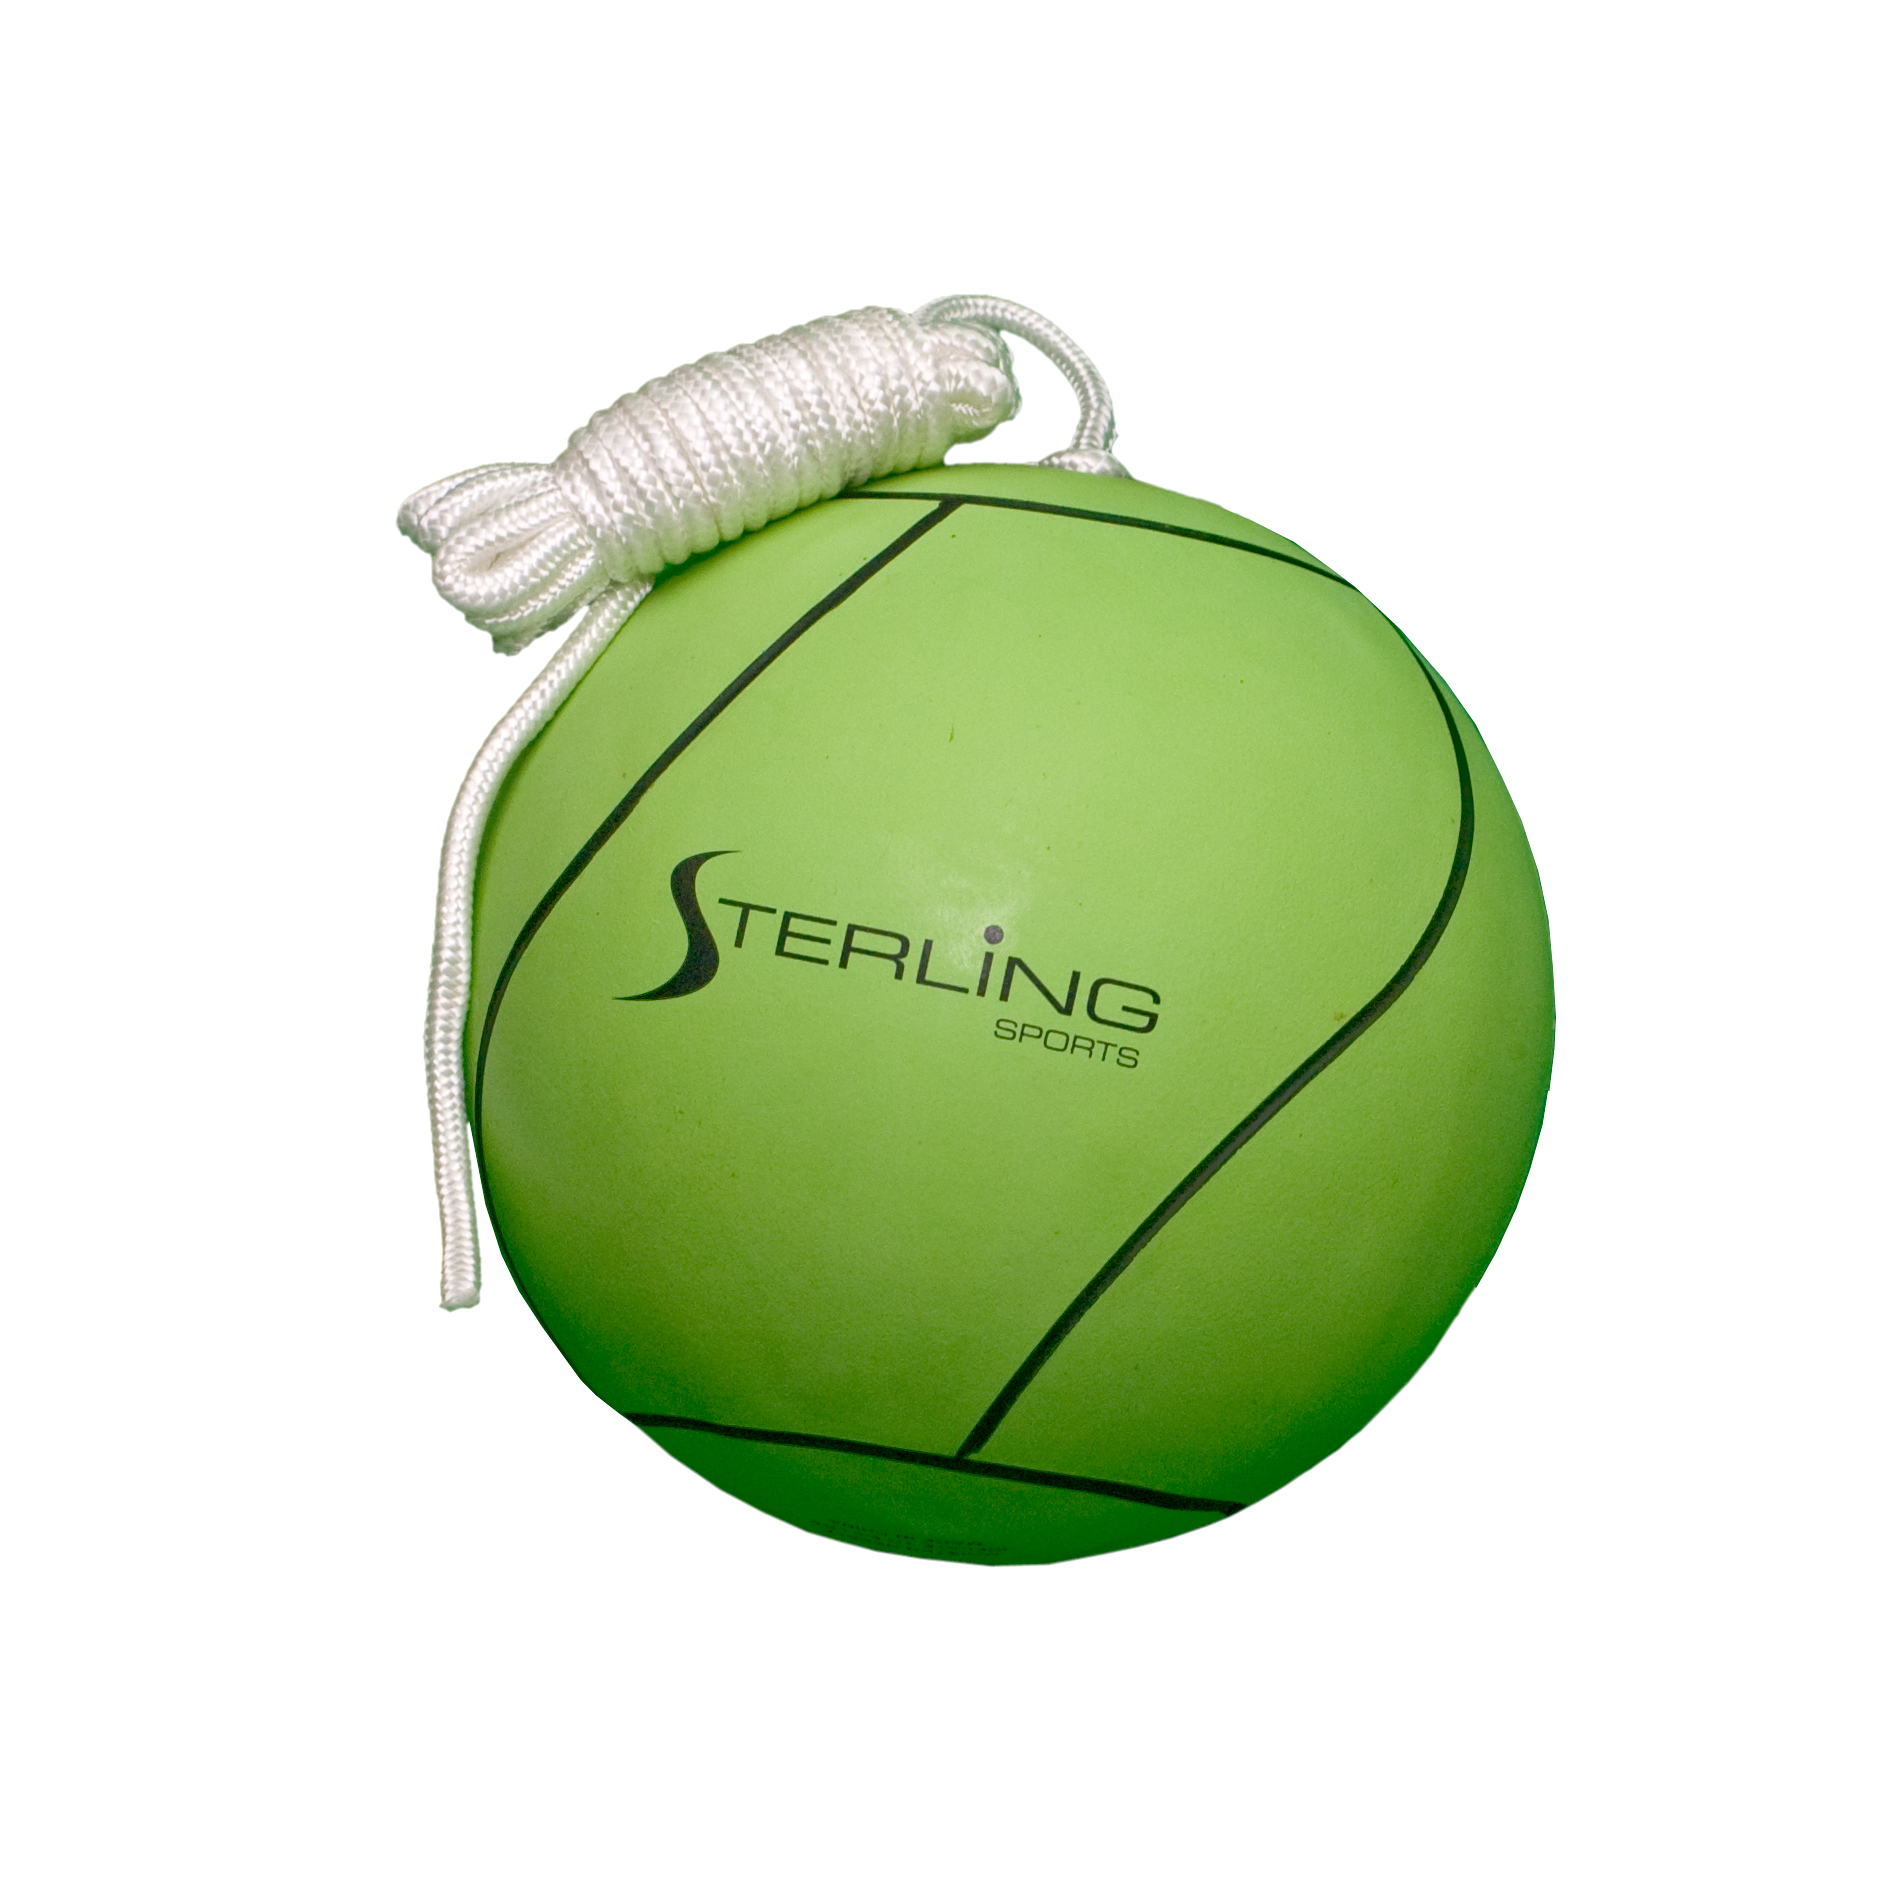 Sterling Sports Neon Green Tetherball